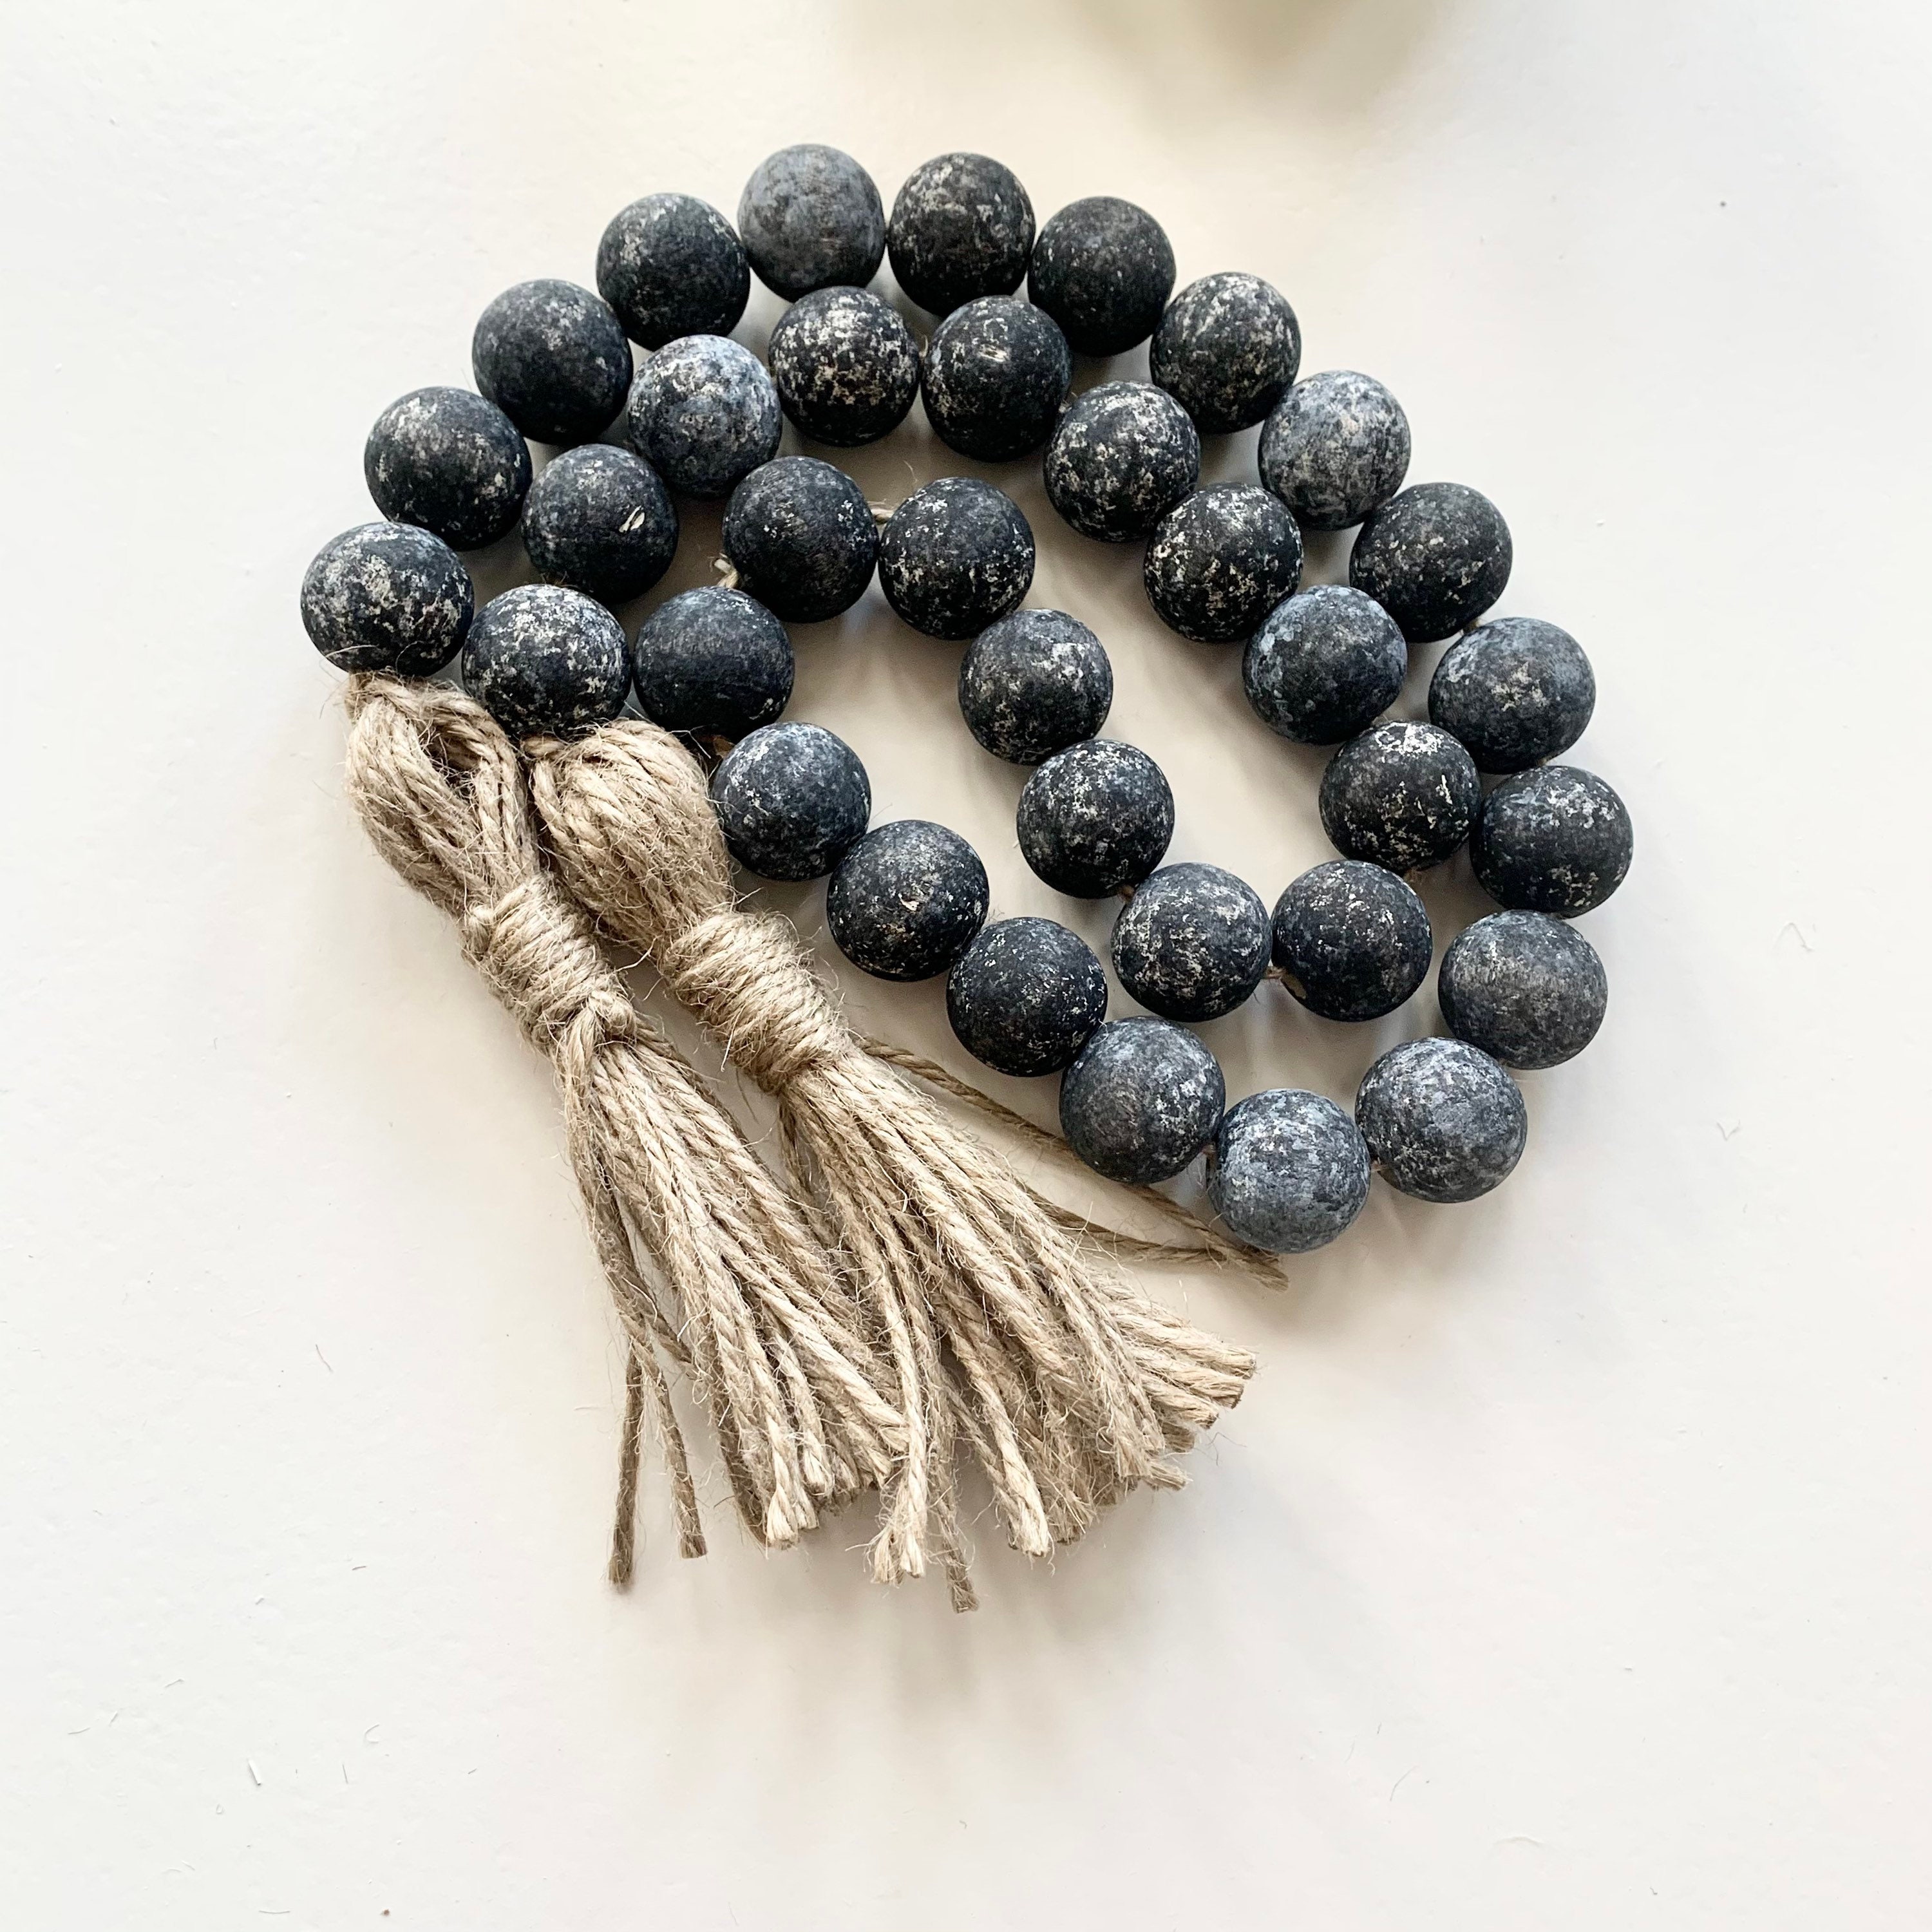 Large Wood Bead Garland with 1.6 Diameter Wooden Beads Tassels, Decorative  Beads Boho Decor, Long Rustic Farmhouse Wood Beads Garland for Home Tiered